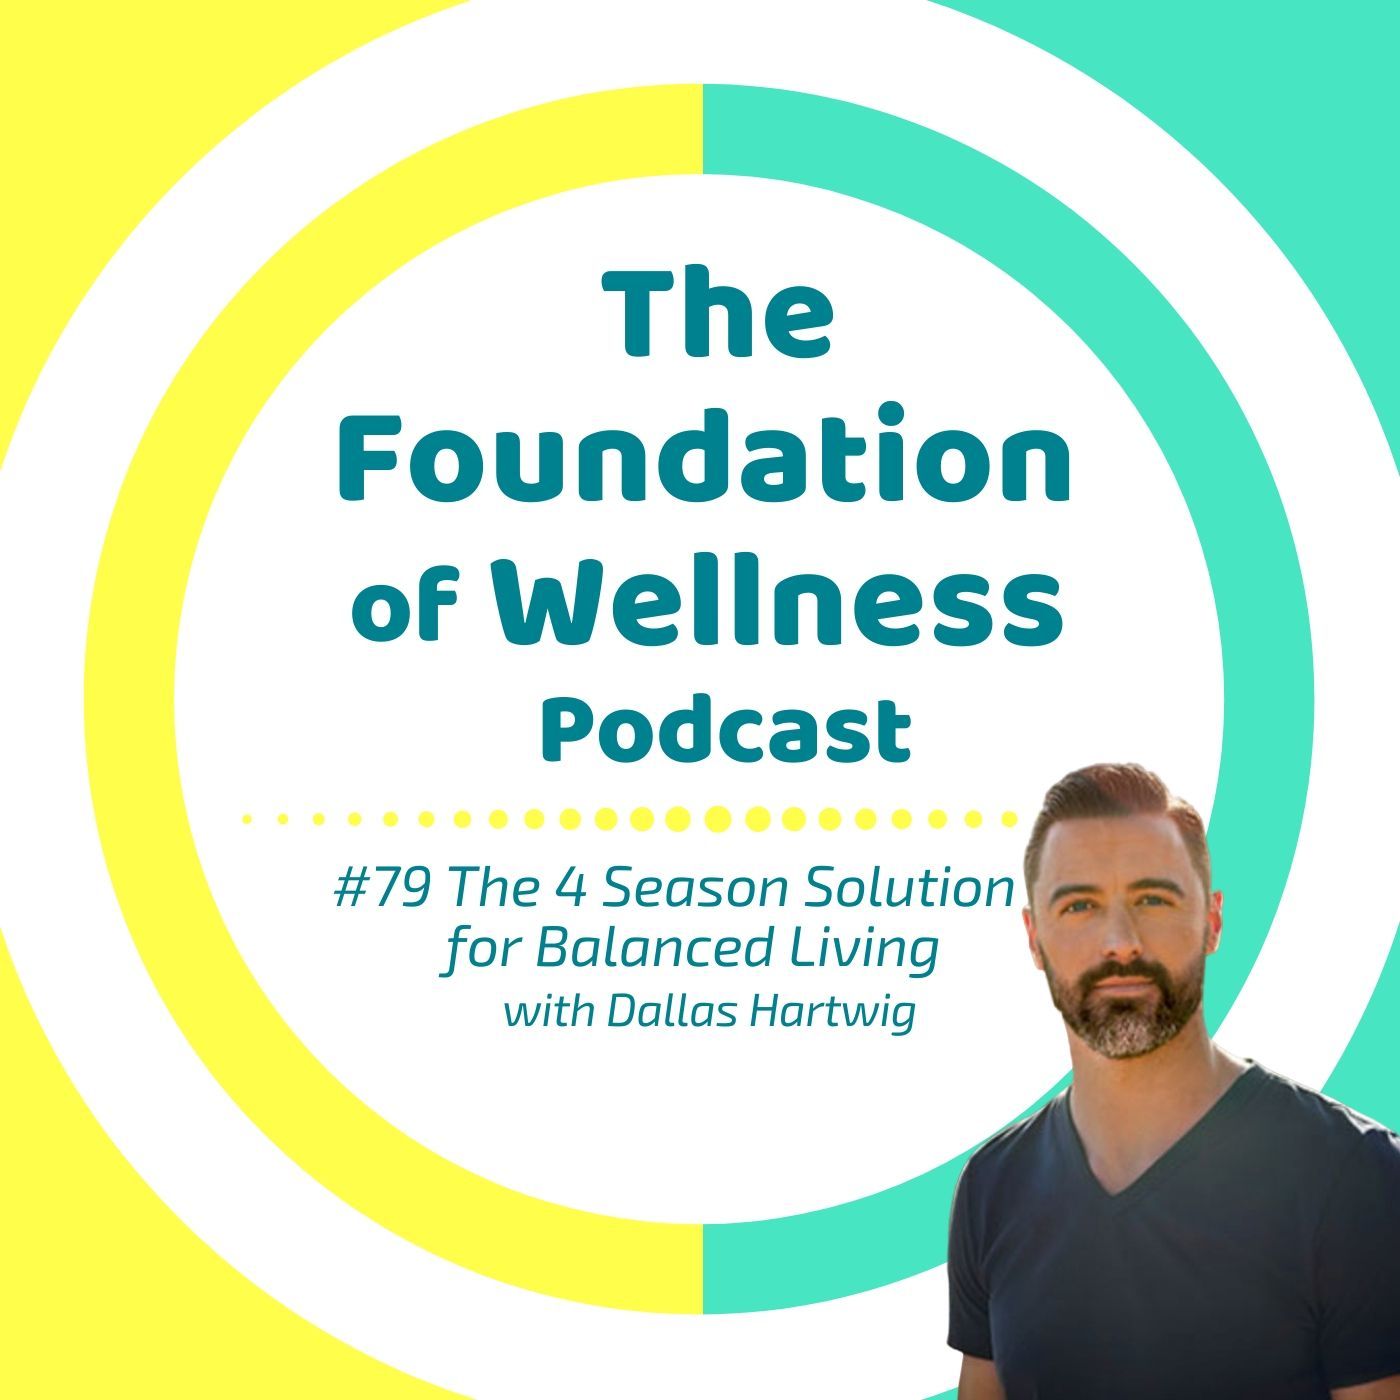 #79: The 4 Season Solution for a Balanced Life, with Dallas Hartwig